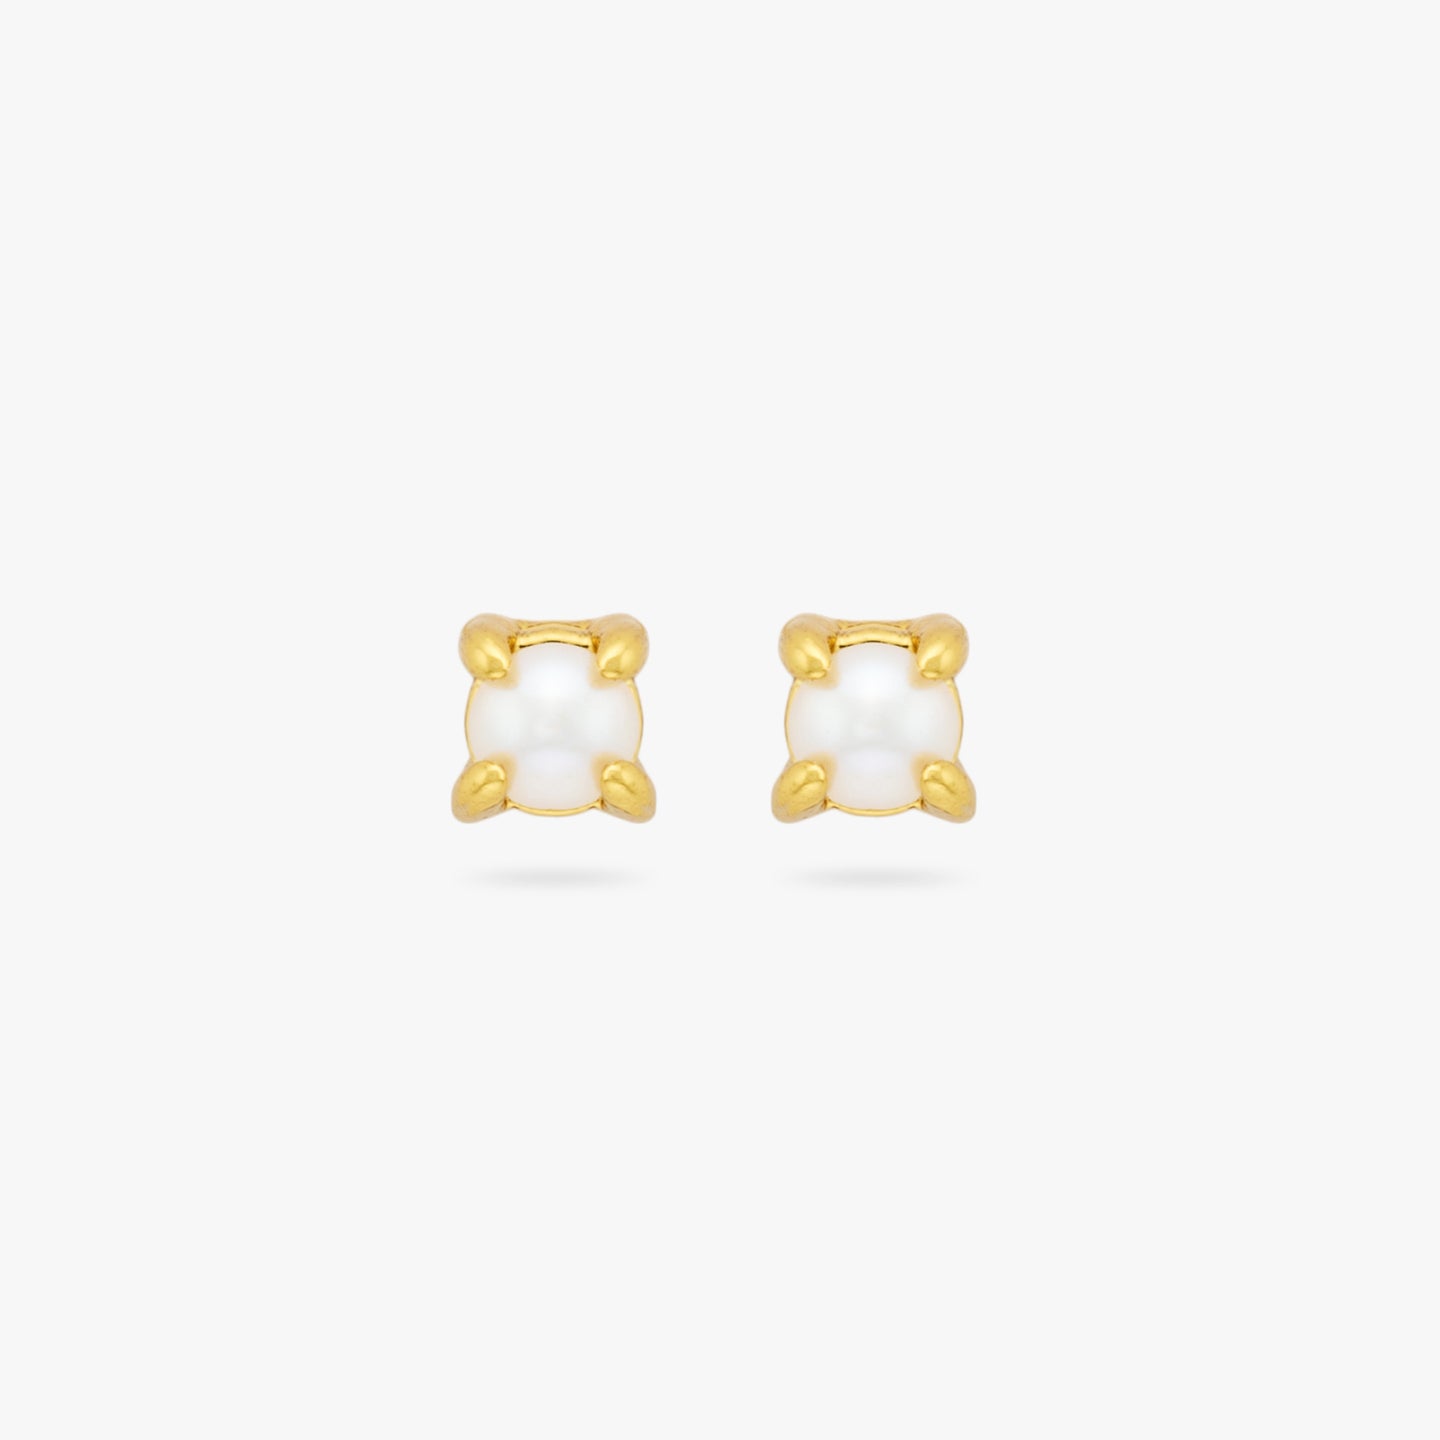 This is a pair of small gold studs with a pearl accents [pair] color:null|gold